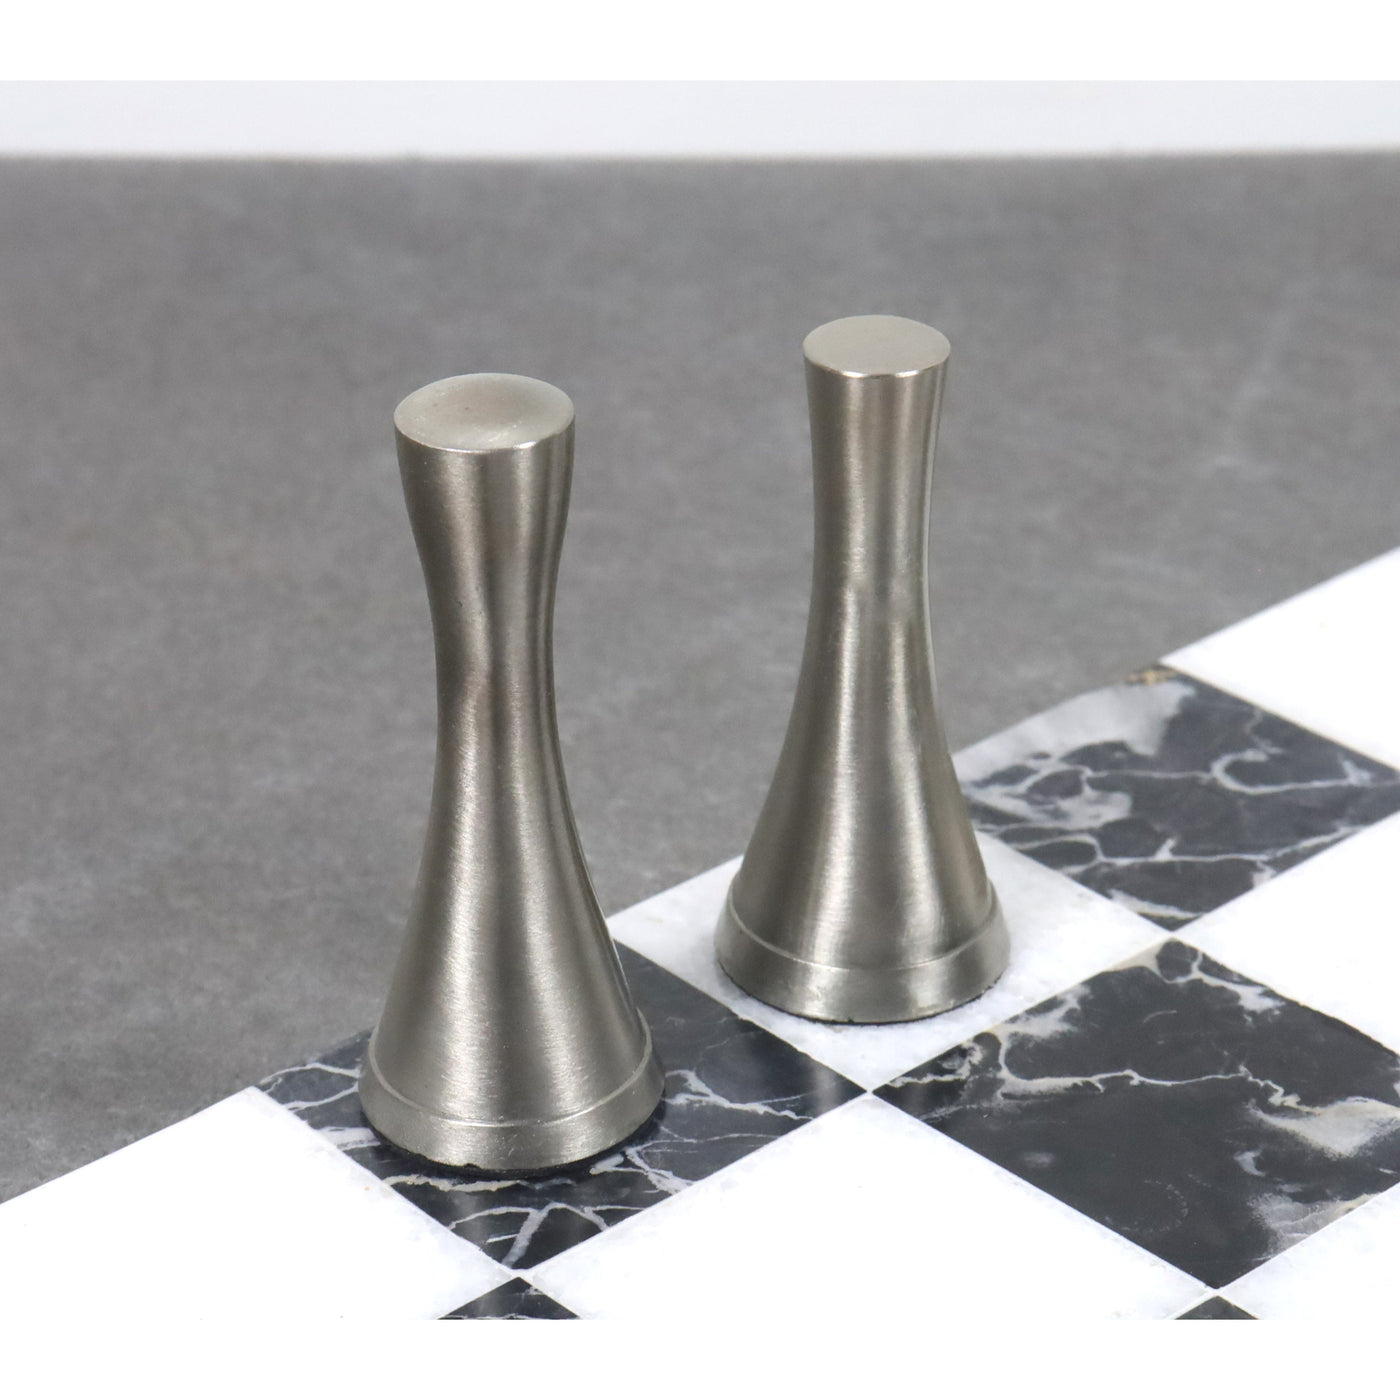 Brass Chess Set combo of 3.1" Tower Chess Pieces